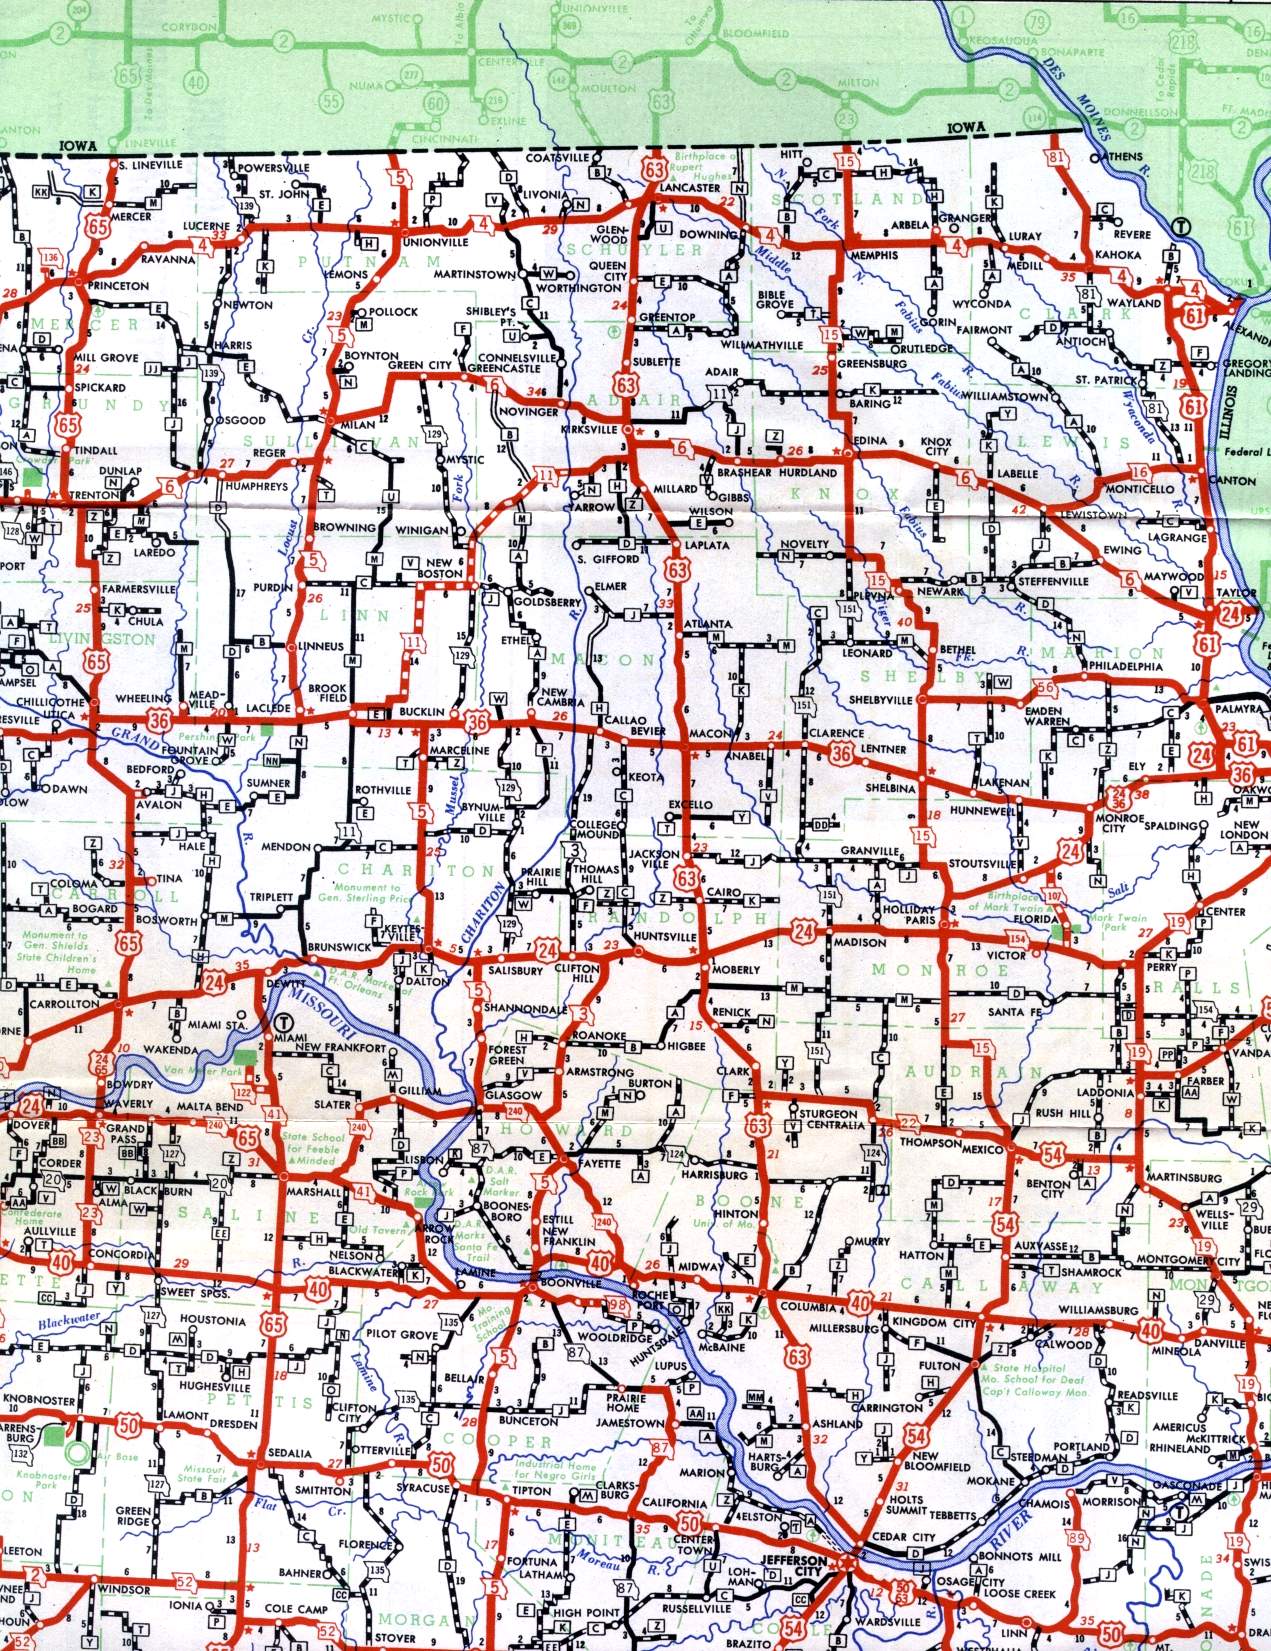 Section of 1950 official Missouri highway map